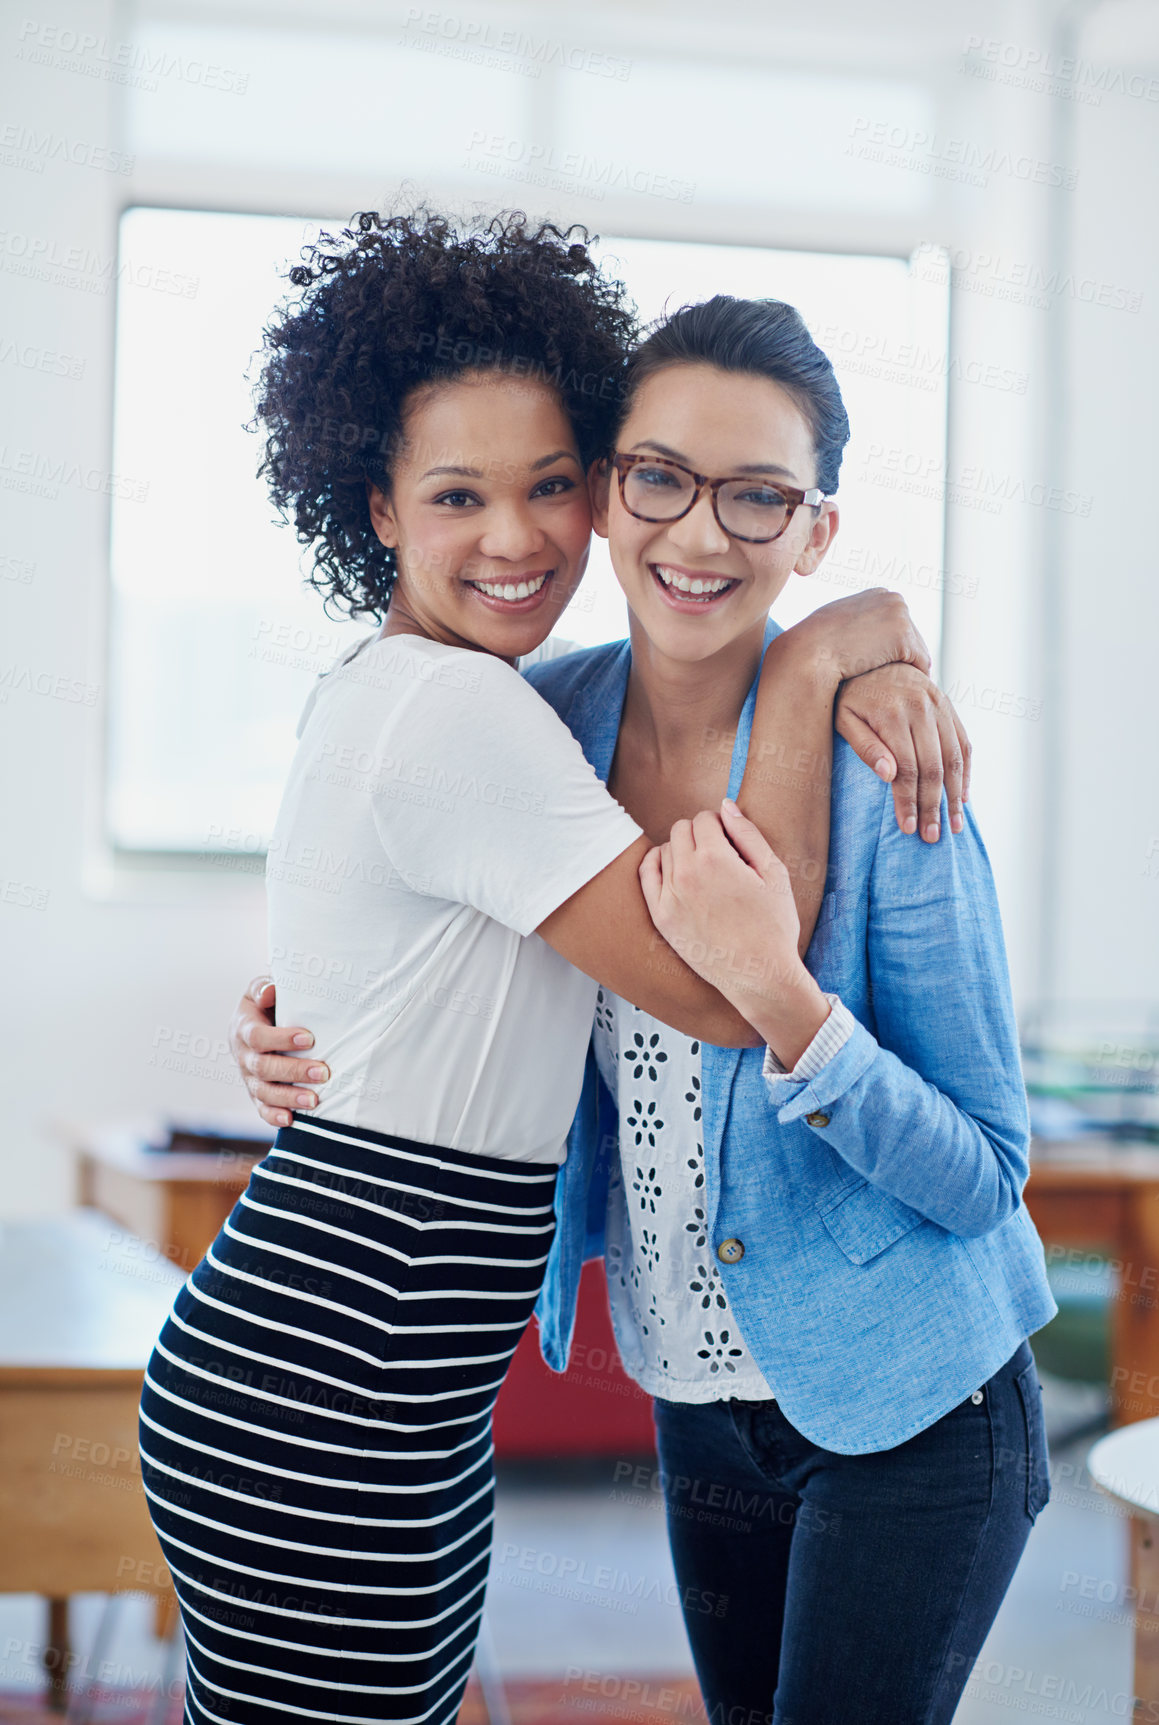 Buy stock photo Portrait of two female coworkers embracing happily in an office